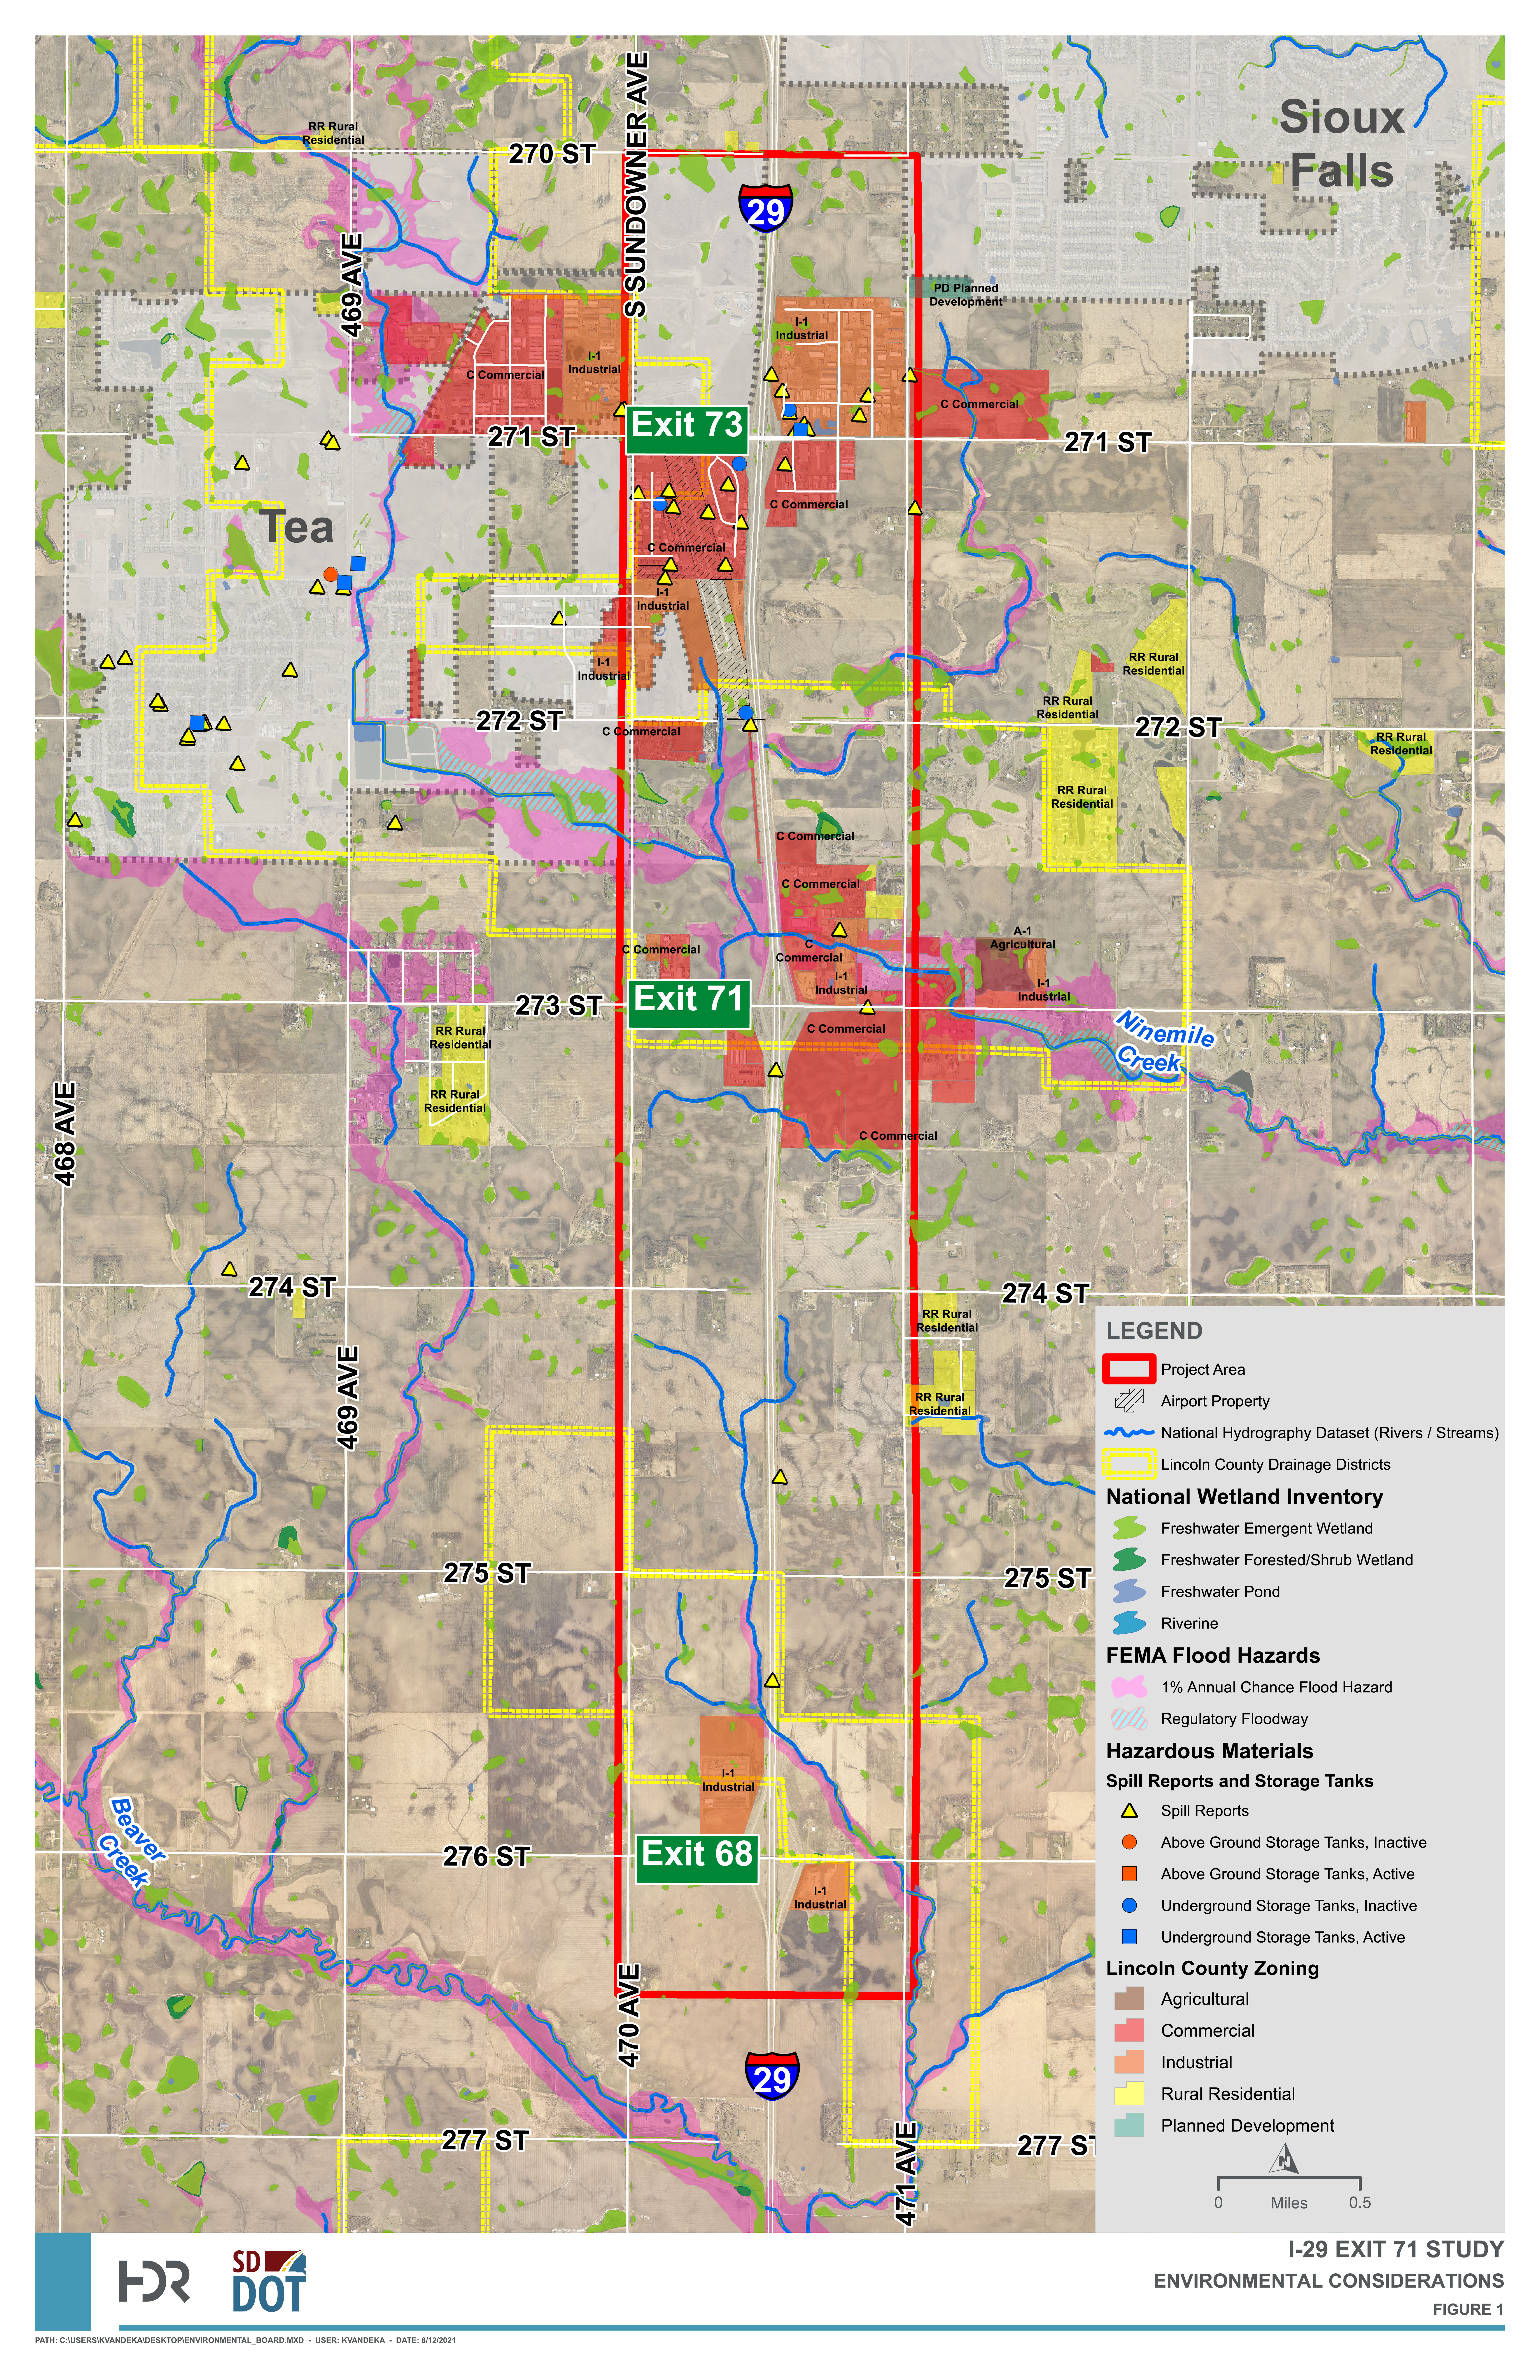 The Environmental Considerations graphic shows the locations of environmental aspects that could prohibit or be impacted by future projects in the study area. Details on the diagram include airport property, rivers and streams, Lincoln County drainage districts, wetlands, FEMA flood hazards, spill reports and storage tanks, and land zoning.   